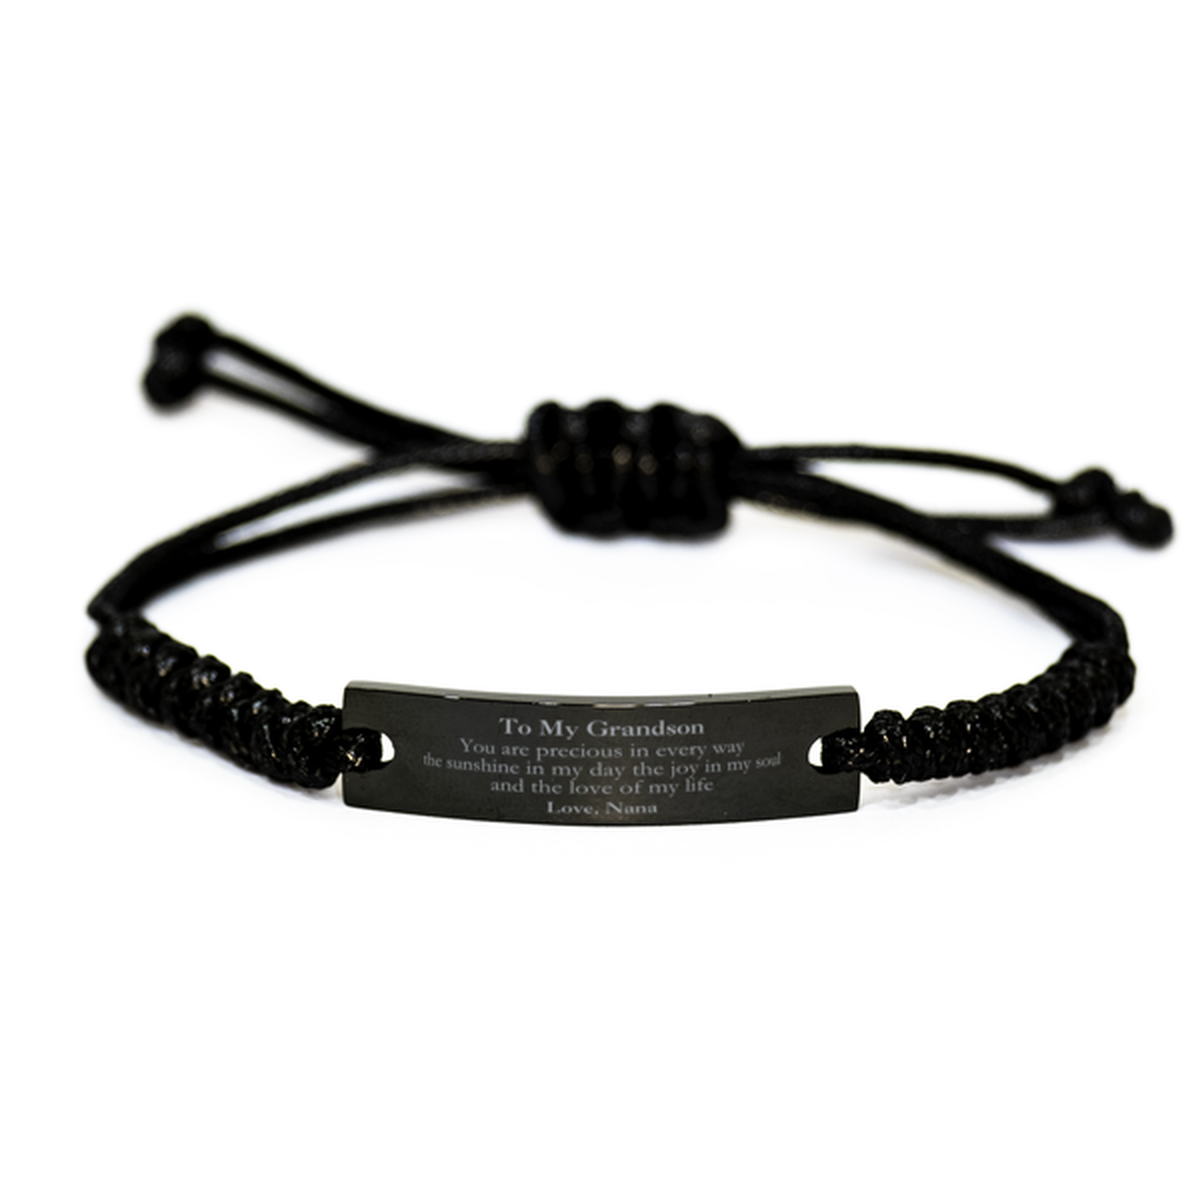 Graduation Gifts for Grandson Black Rope Bracelet Present from Nana, Christmas Grandson Birthday Gifts Grandson You are precious in every way the sunshine in my day. Love, Nana